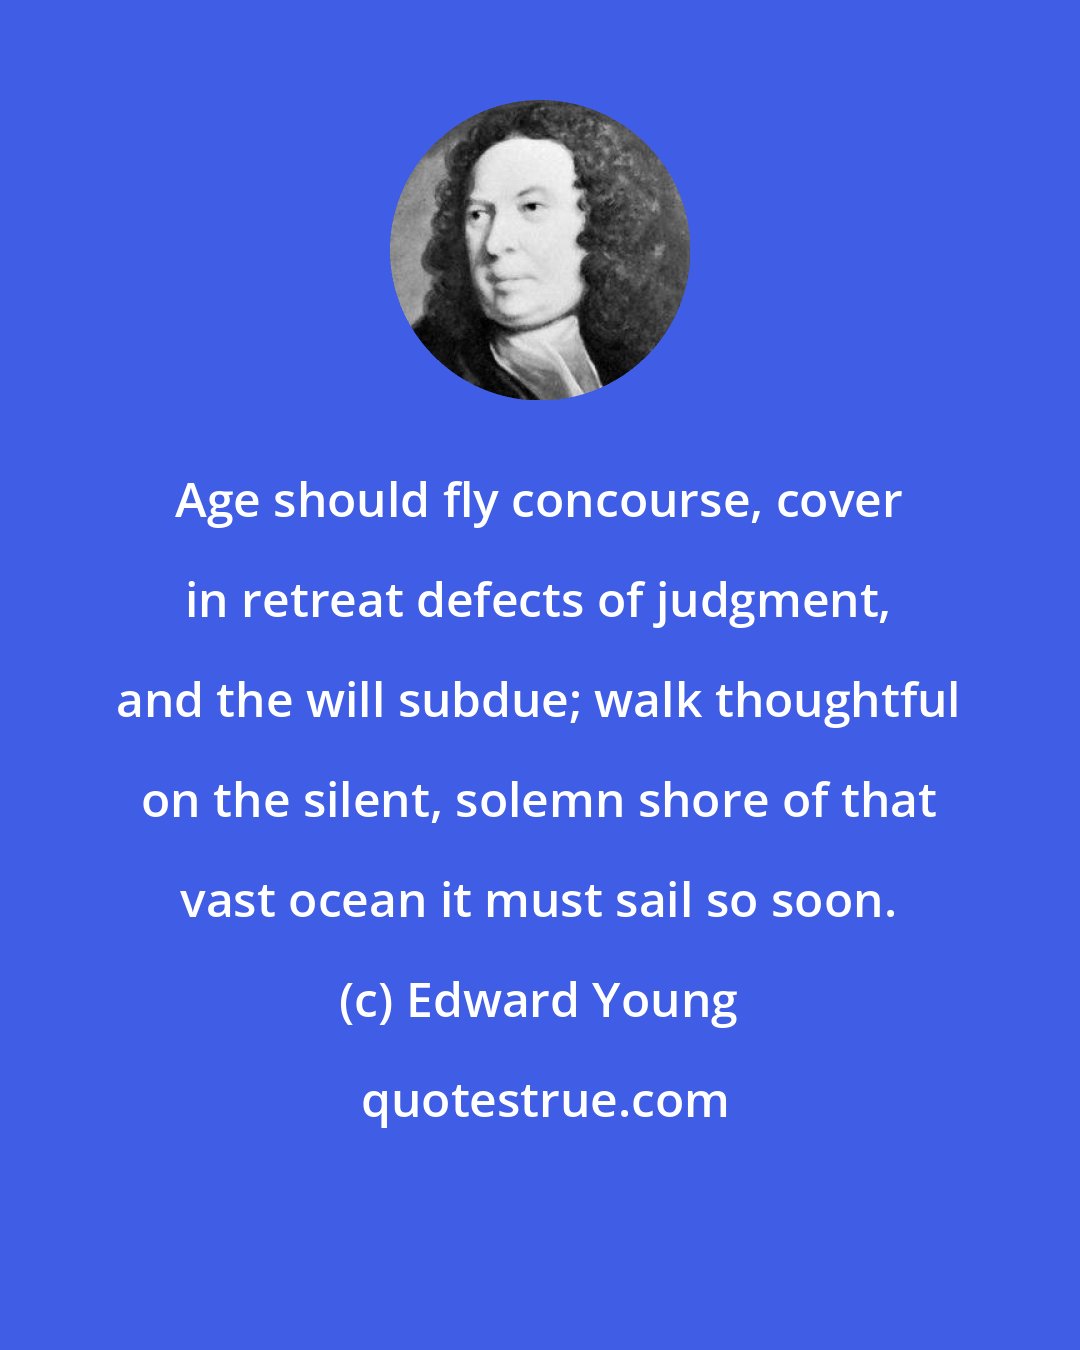 Edward Young: Age should fly concourse, cover in retreat defects of judgment, and the will subdue; walk thoughtful on the silent, solemn shore of that vast ocean it must sail so soon.